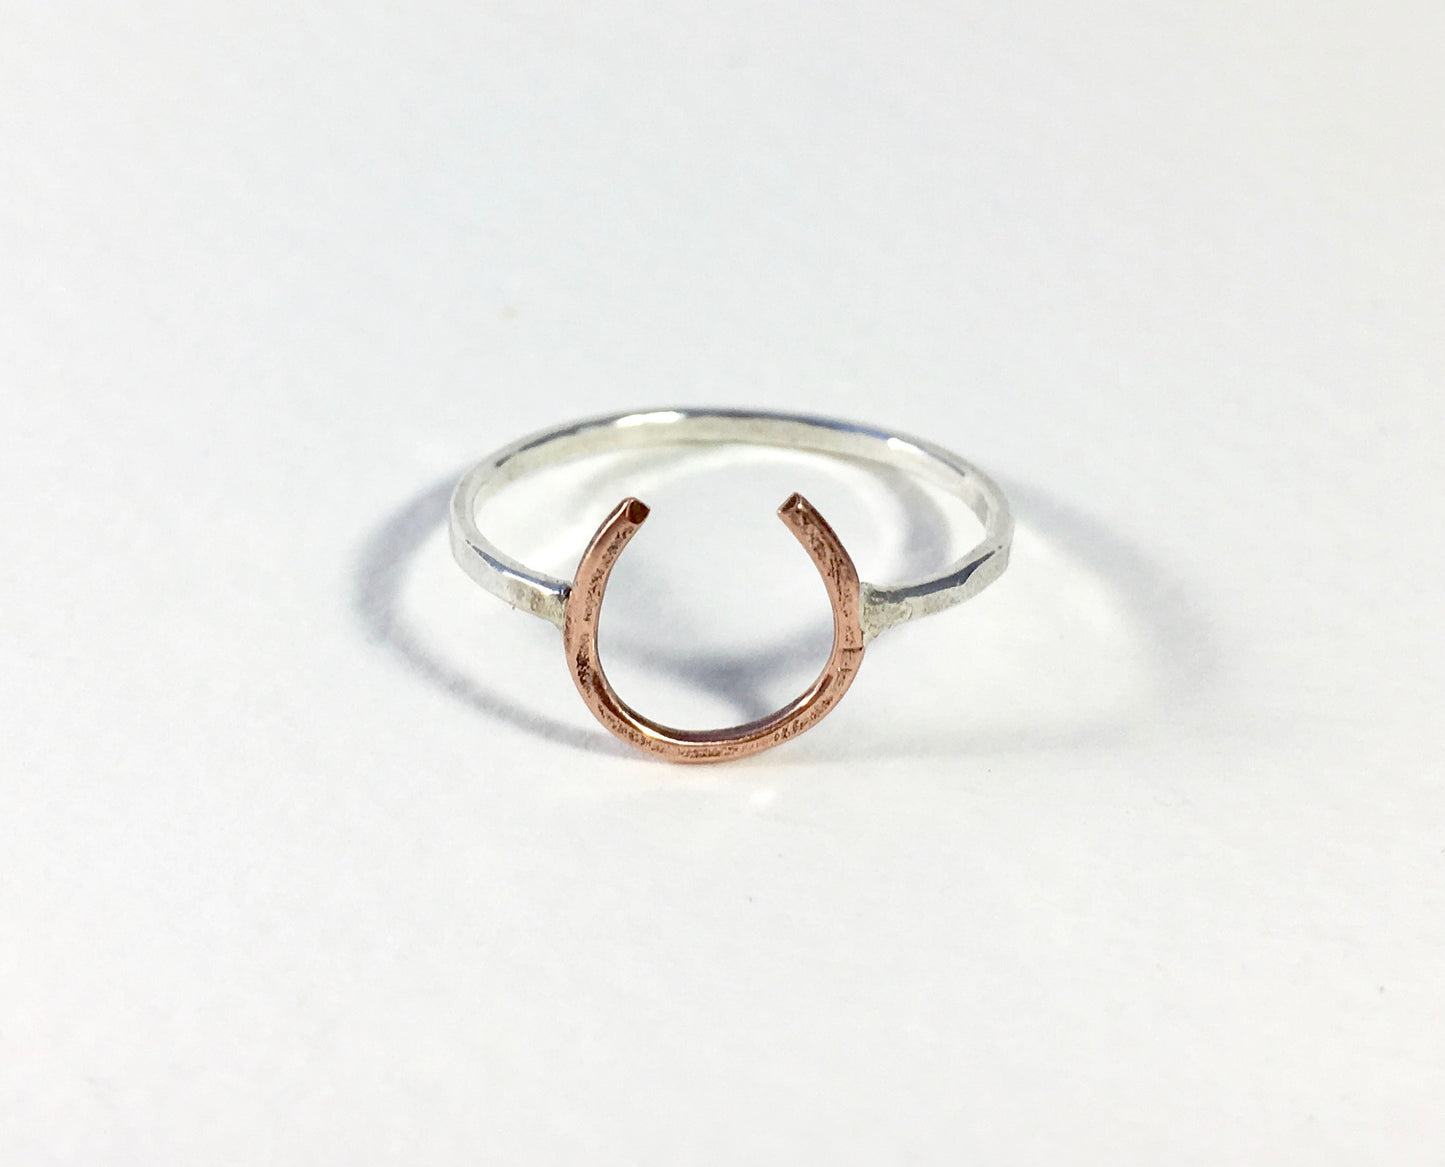 Lucky Horseshoe Ring - Small - Equestrian Ring